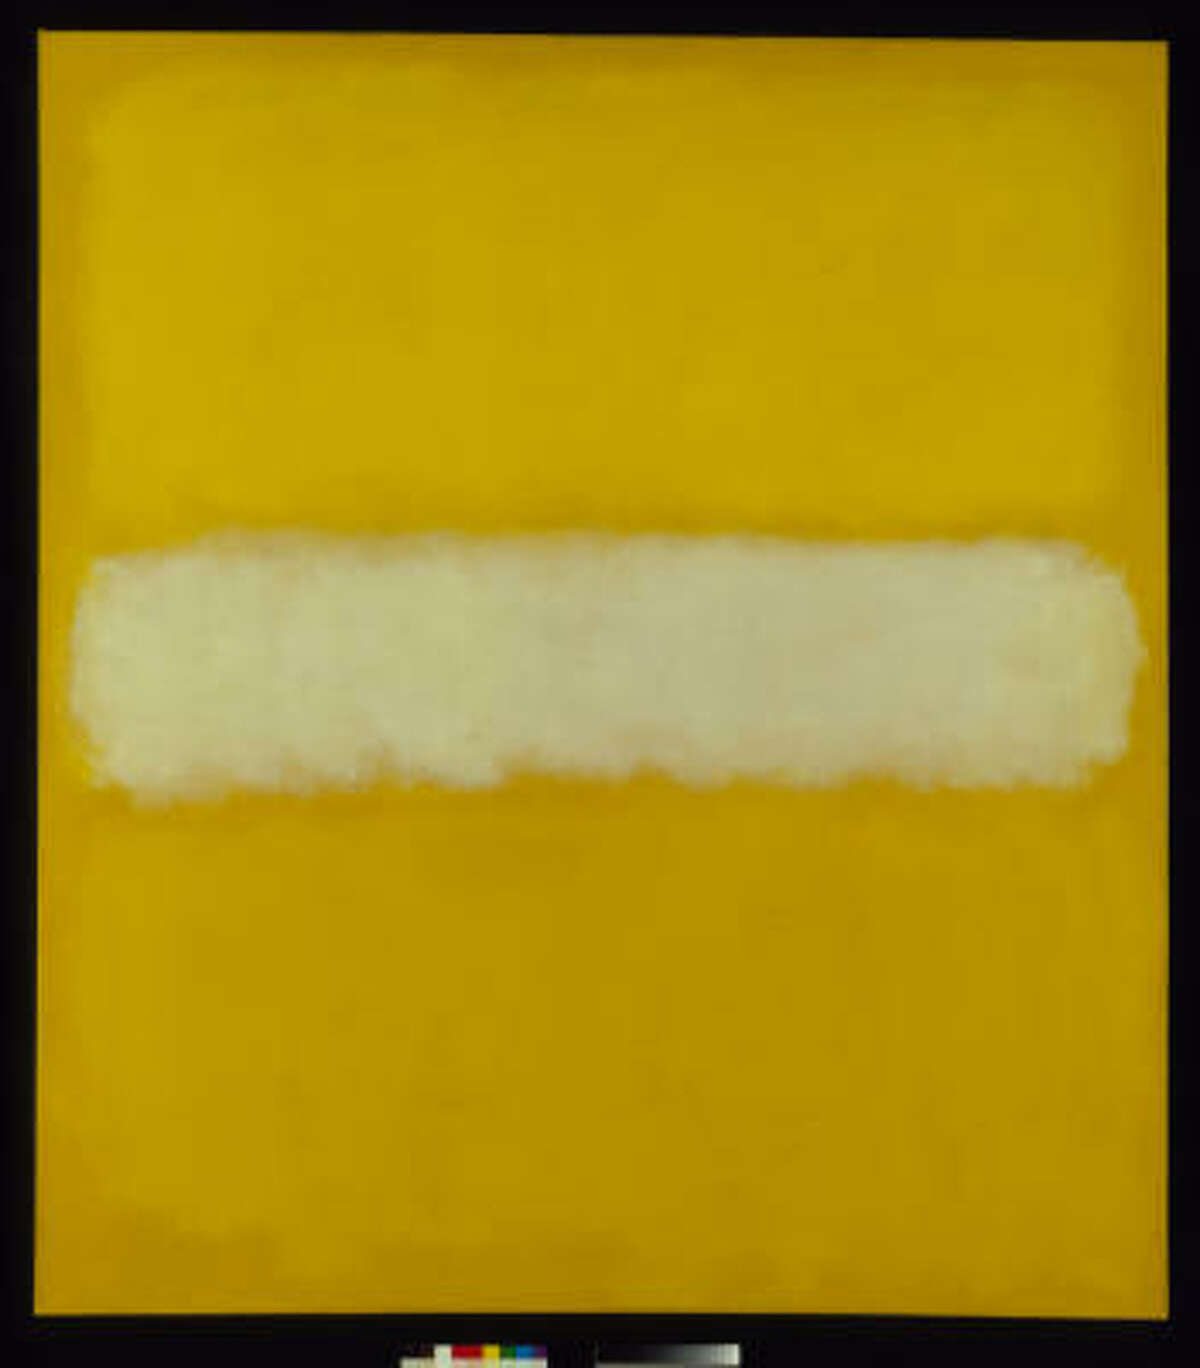 No. 10, 1957, oil on canvas, 69-1/4 x 61-1/2 inches